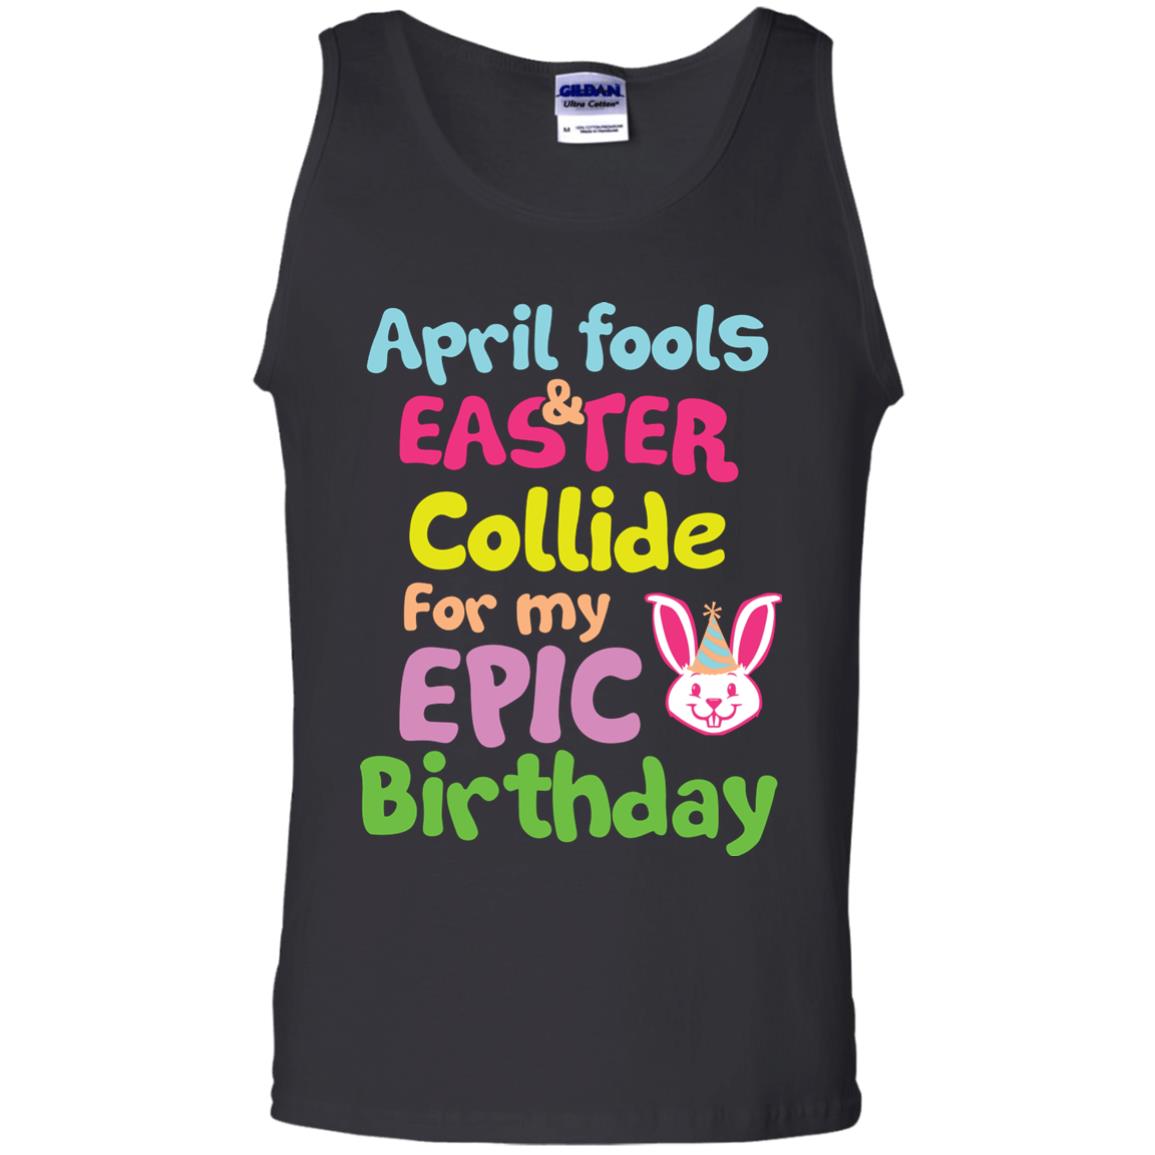 April Fools And Easter Collide For My Epic Birthday Gift Shirt For Easter Day